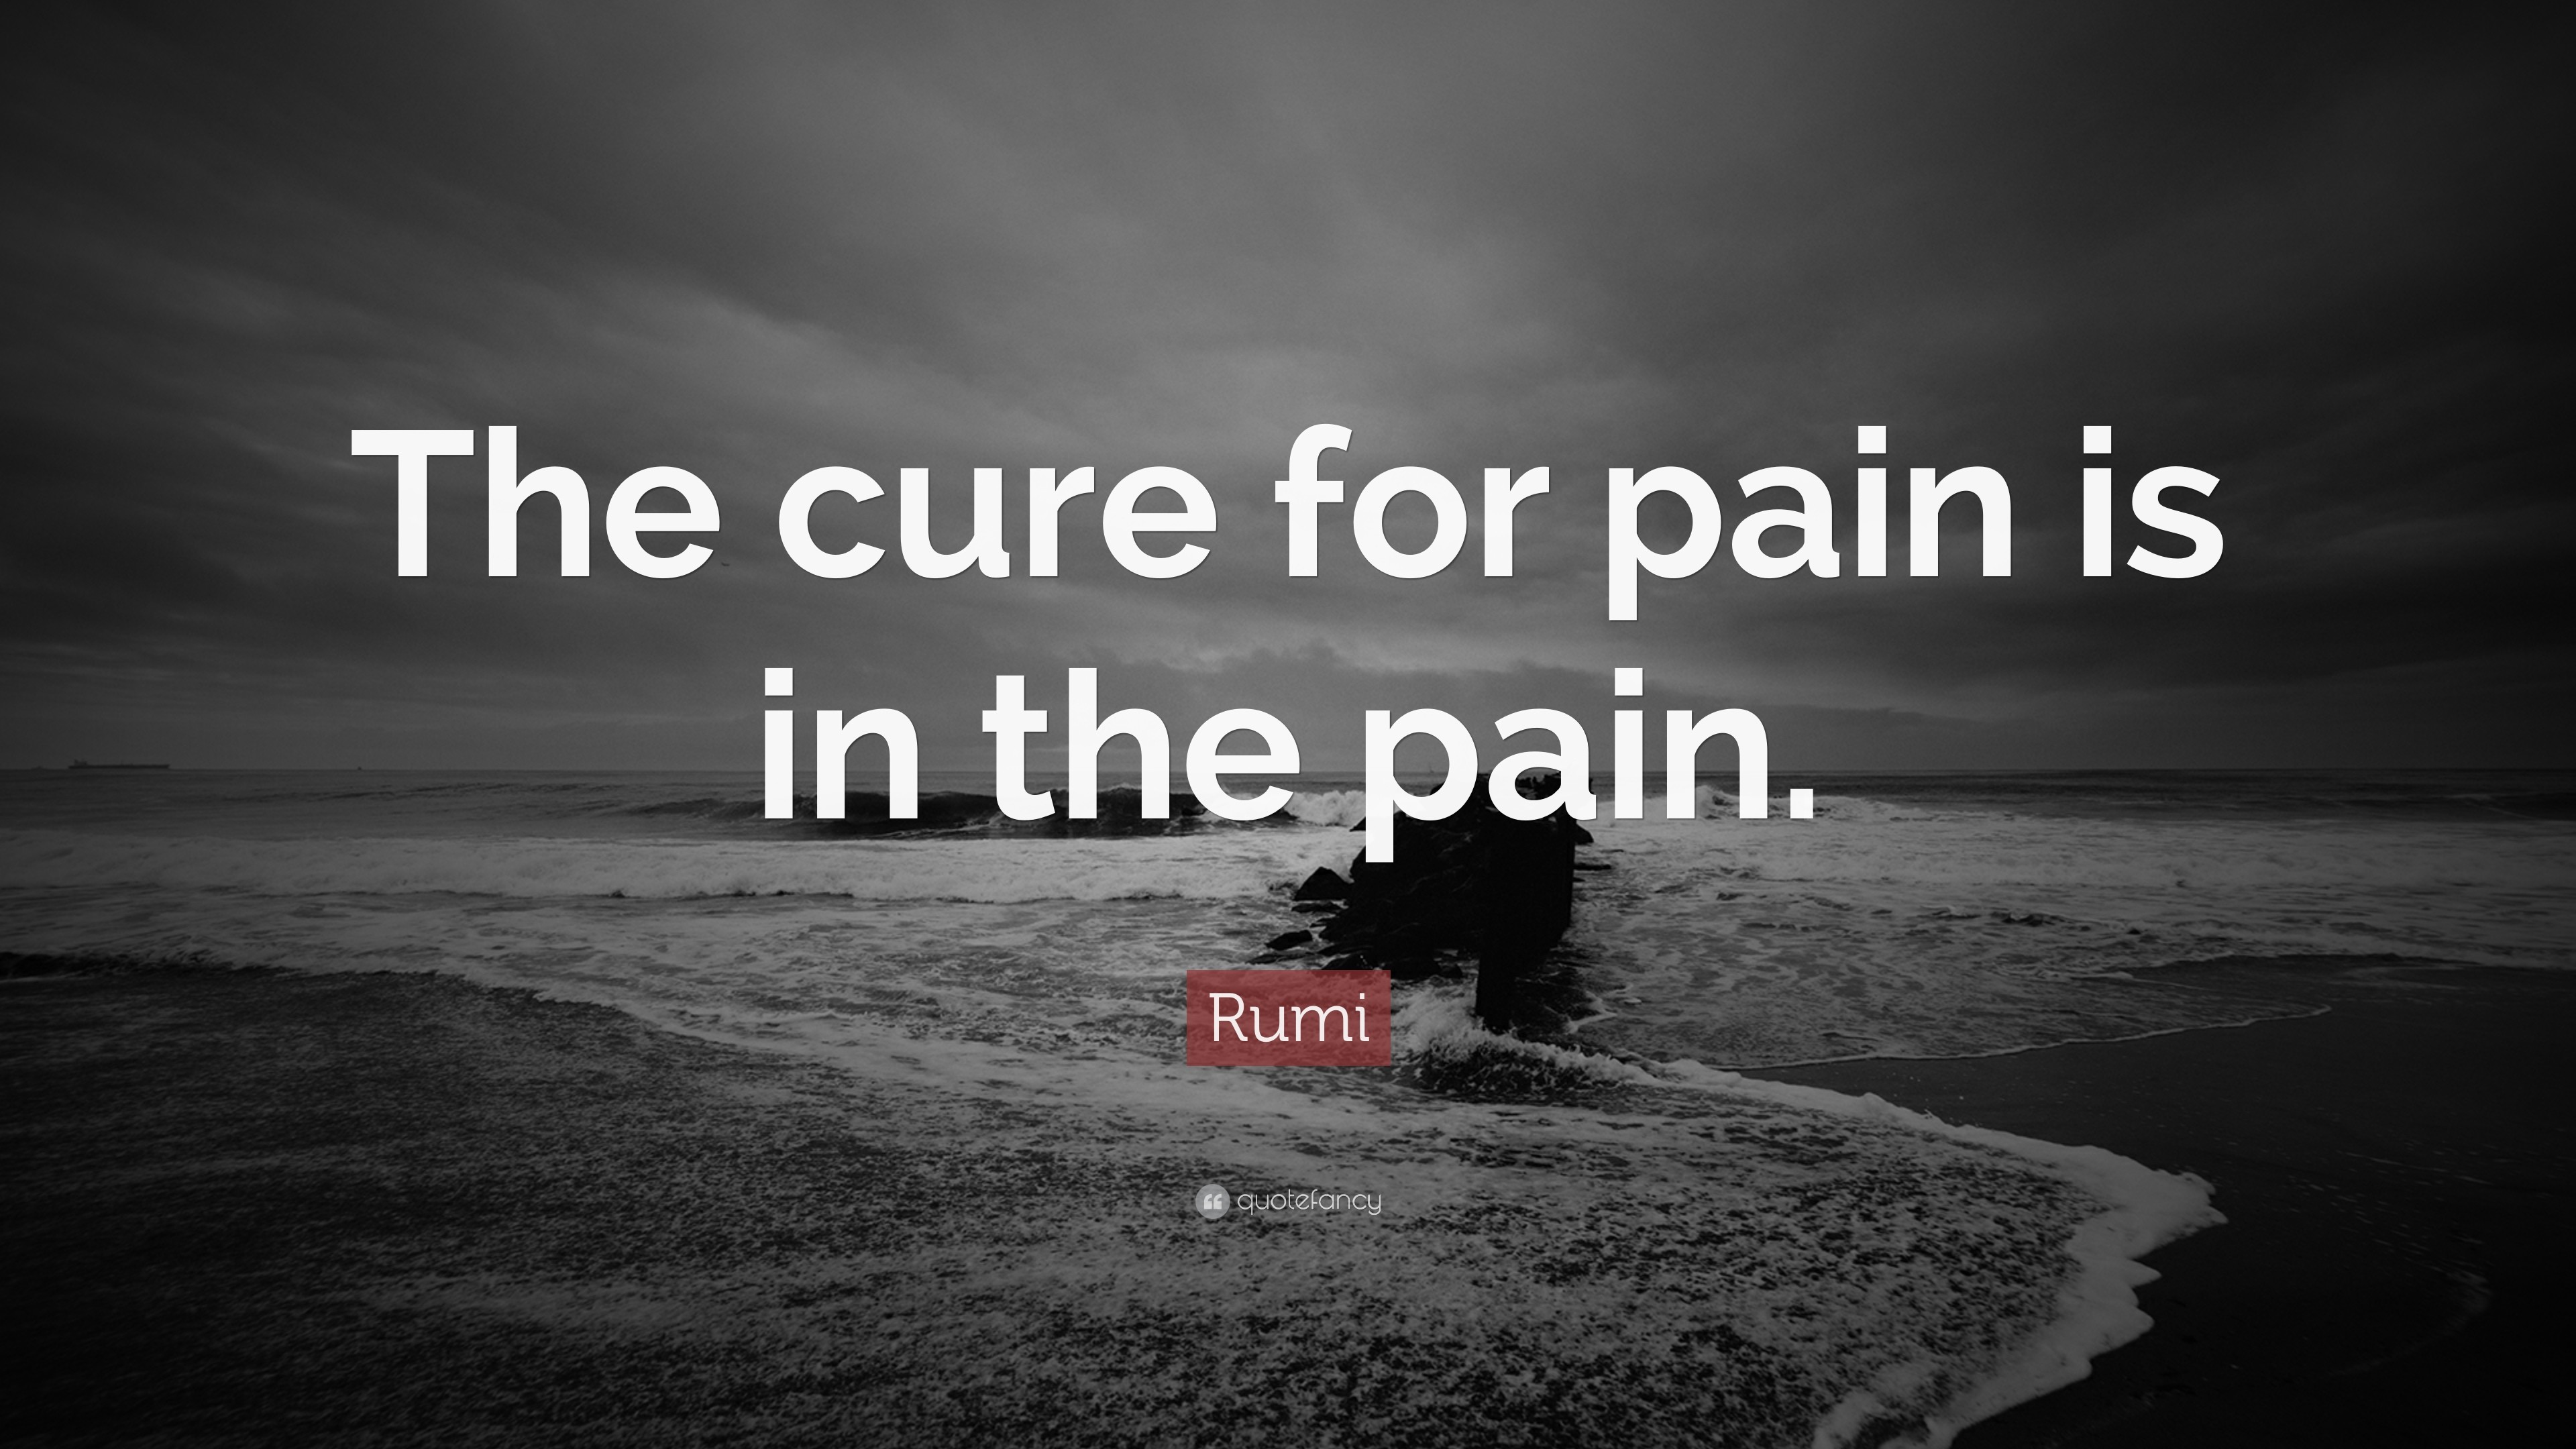 3840x2160 Spiritual Quotes: “The cure for pain is in the pain.” — Rumi